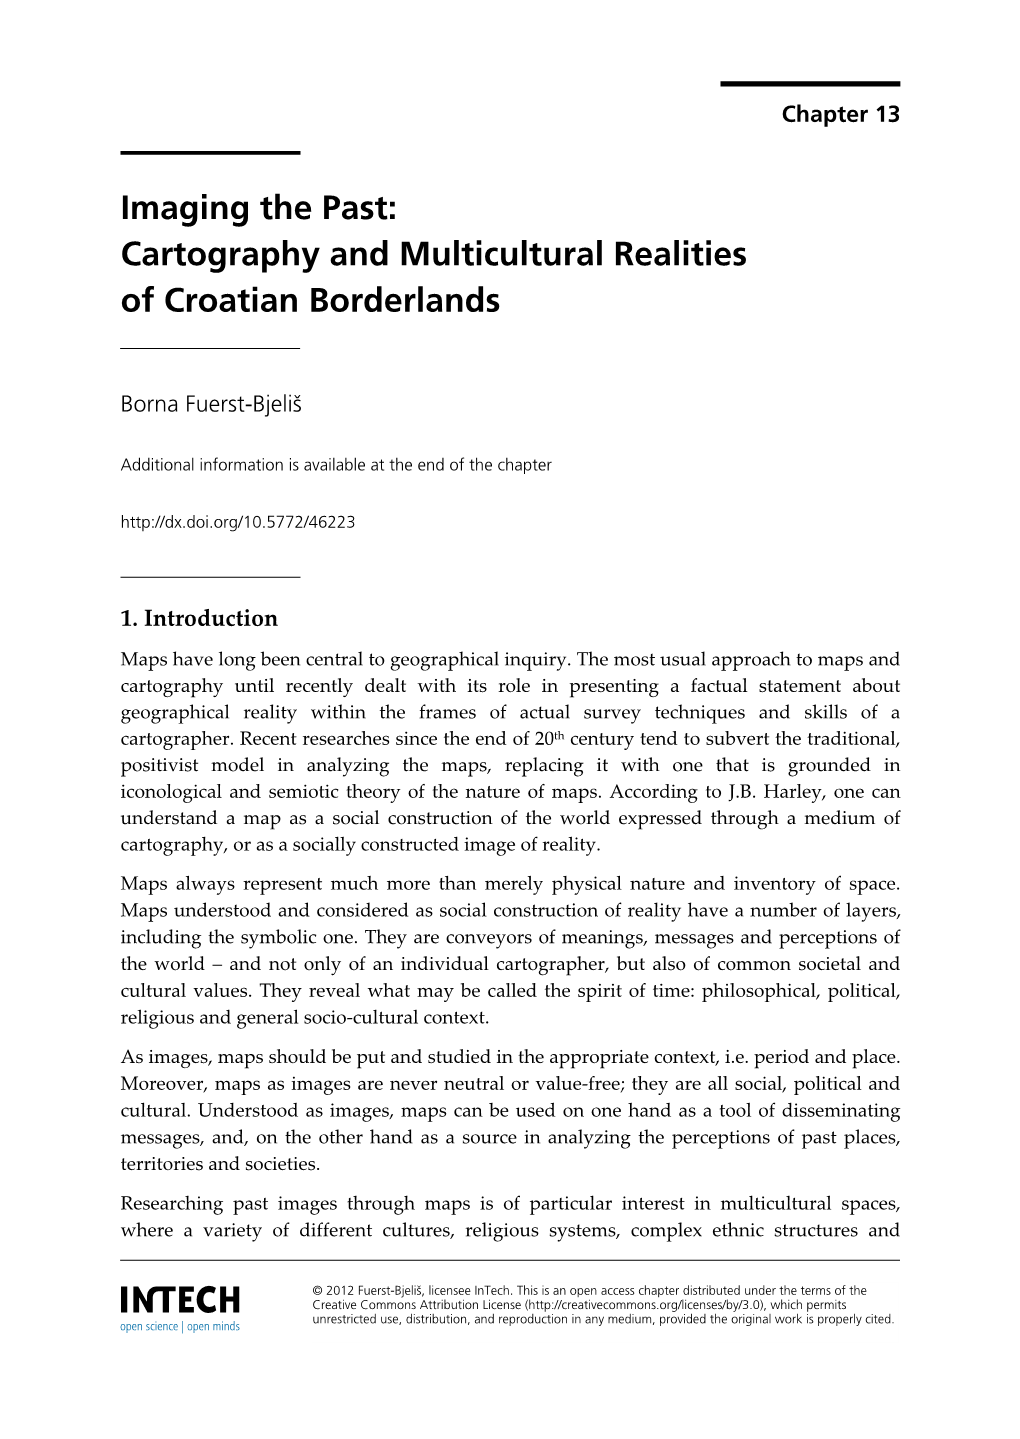 Cartography and Multicultural Realities of Croatian Borderlands